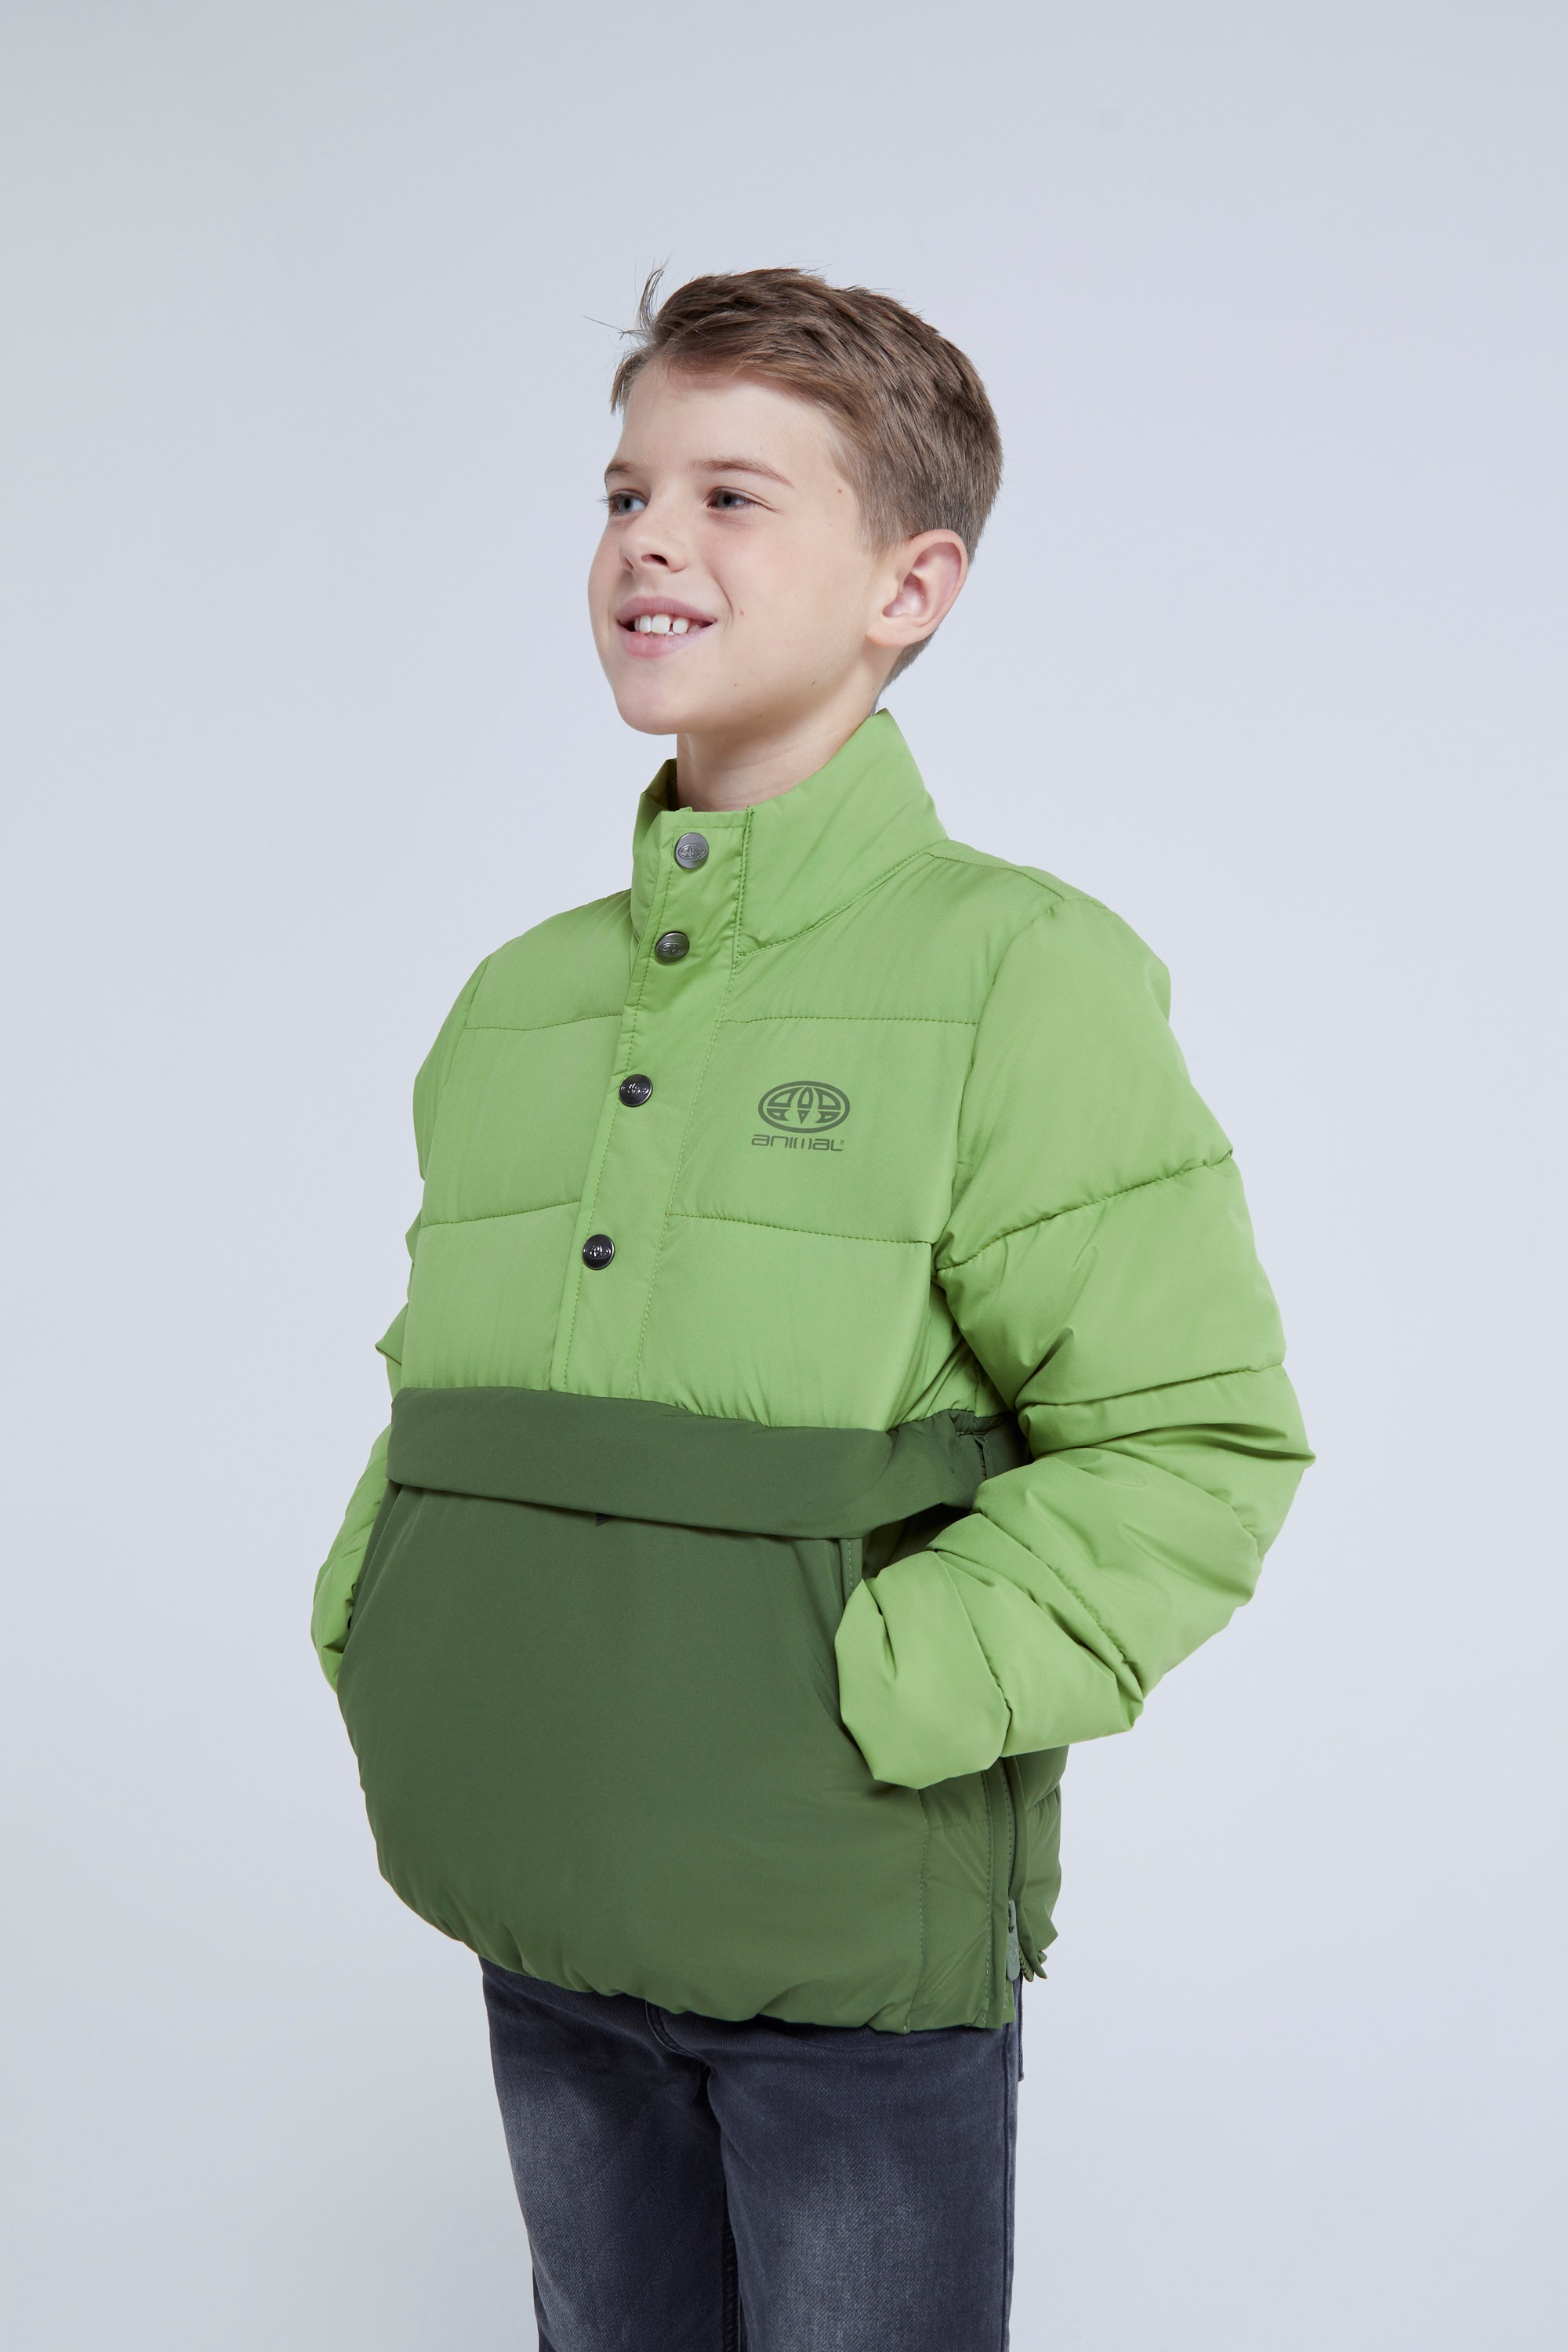 Westbay Kids Recycled Jacket - Green